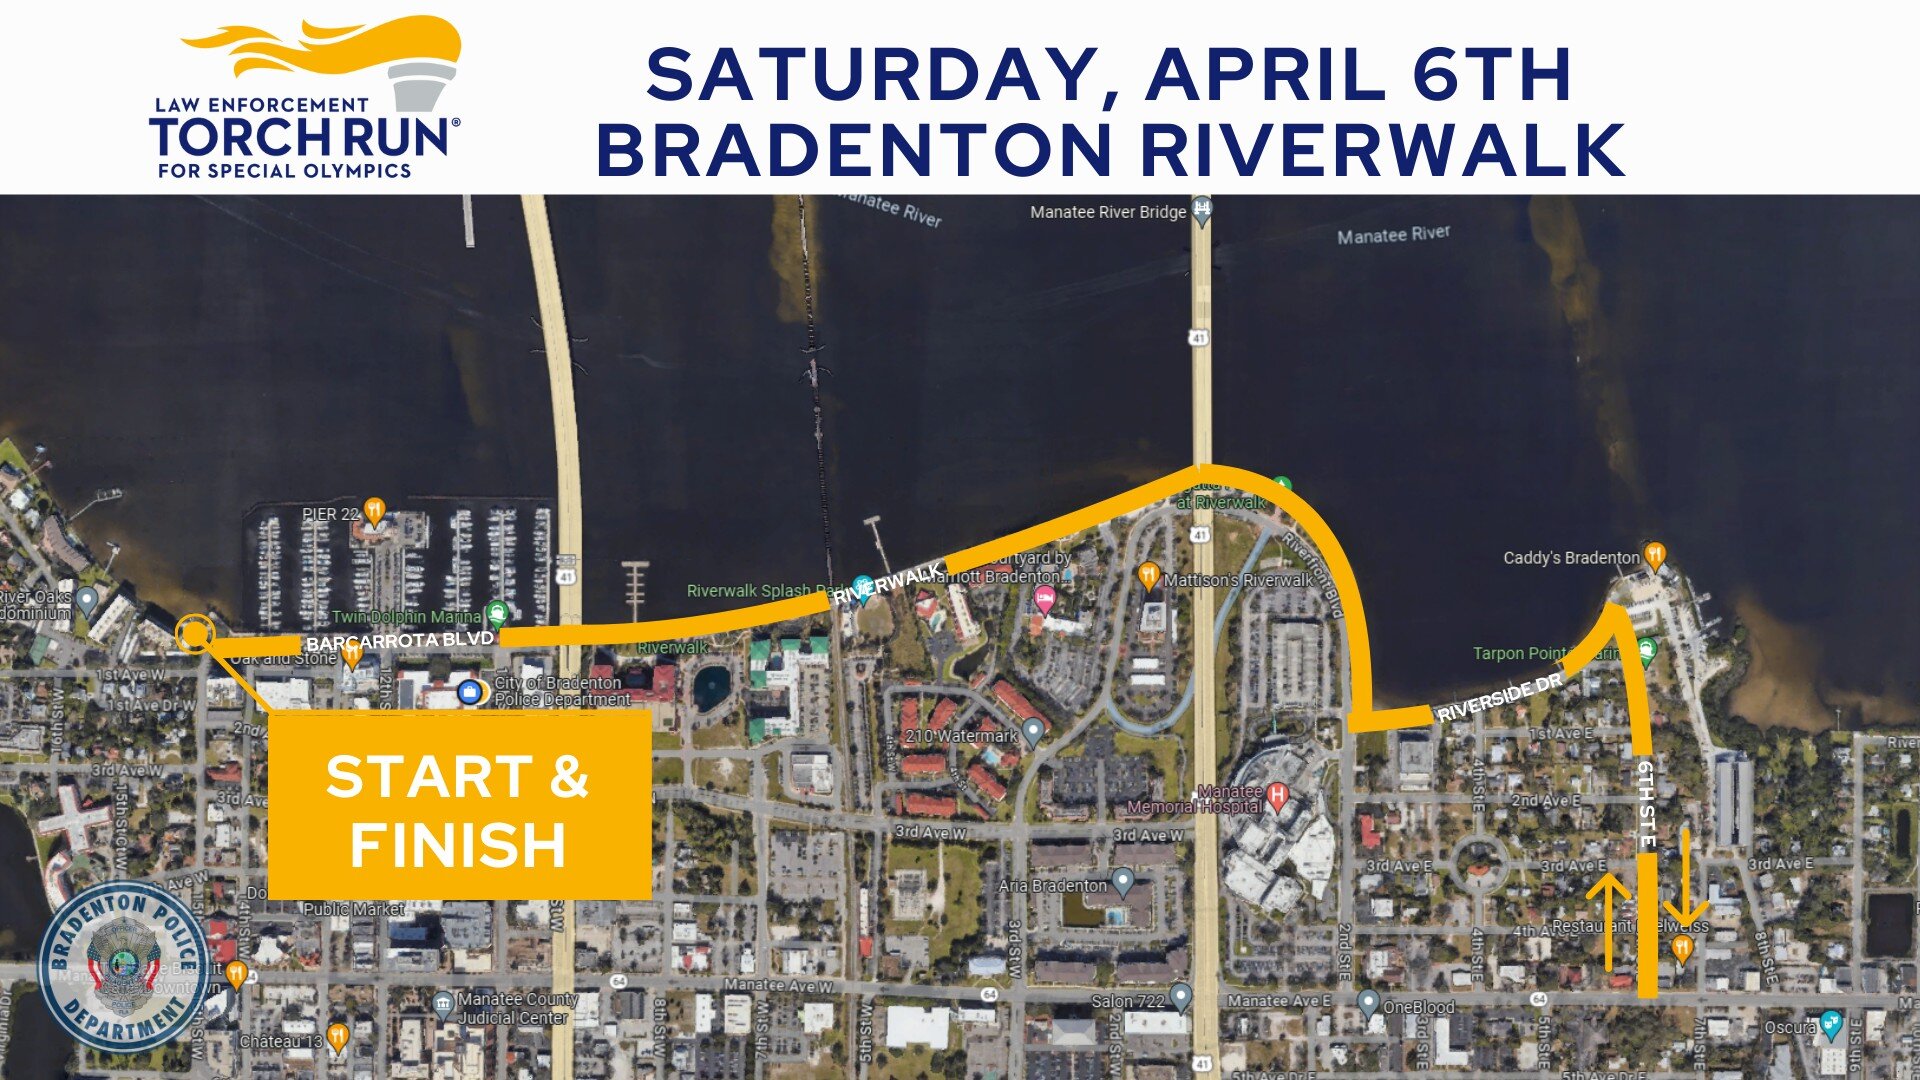 🔥 Join the Bradenton Police Department on the Bradenton Riverwalk on April 6 for the Law Enforcement Torch Run for Special Olympics Florida. The Kids Run Torch Dash is at 8 a.m. and the 5K begins at 8:30 a.m. The Manatee County Sheriff's Office will